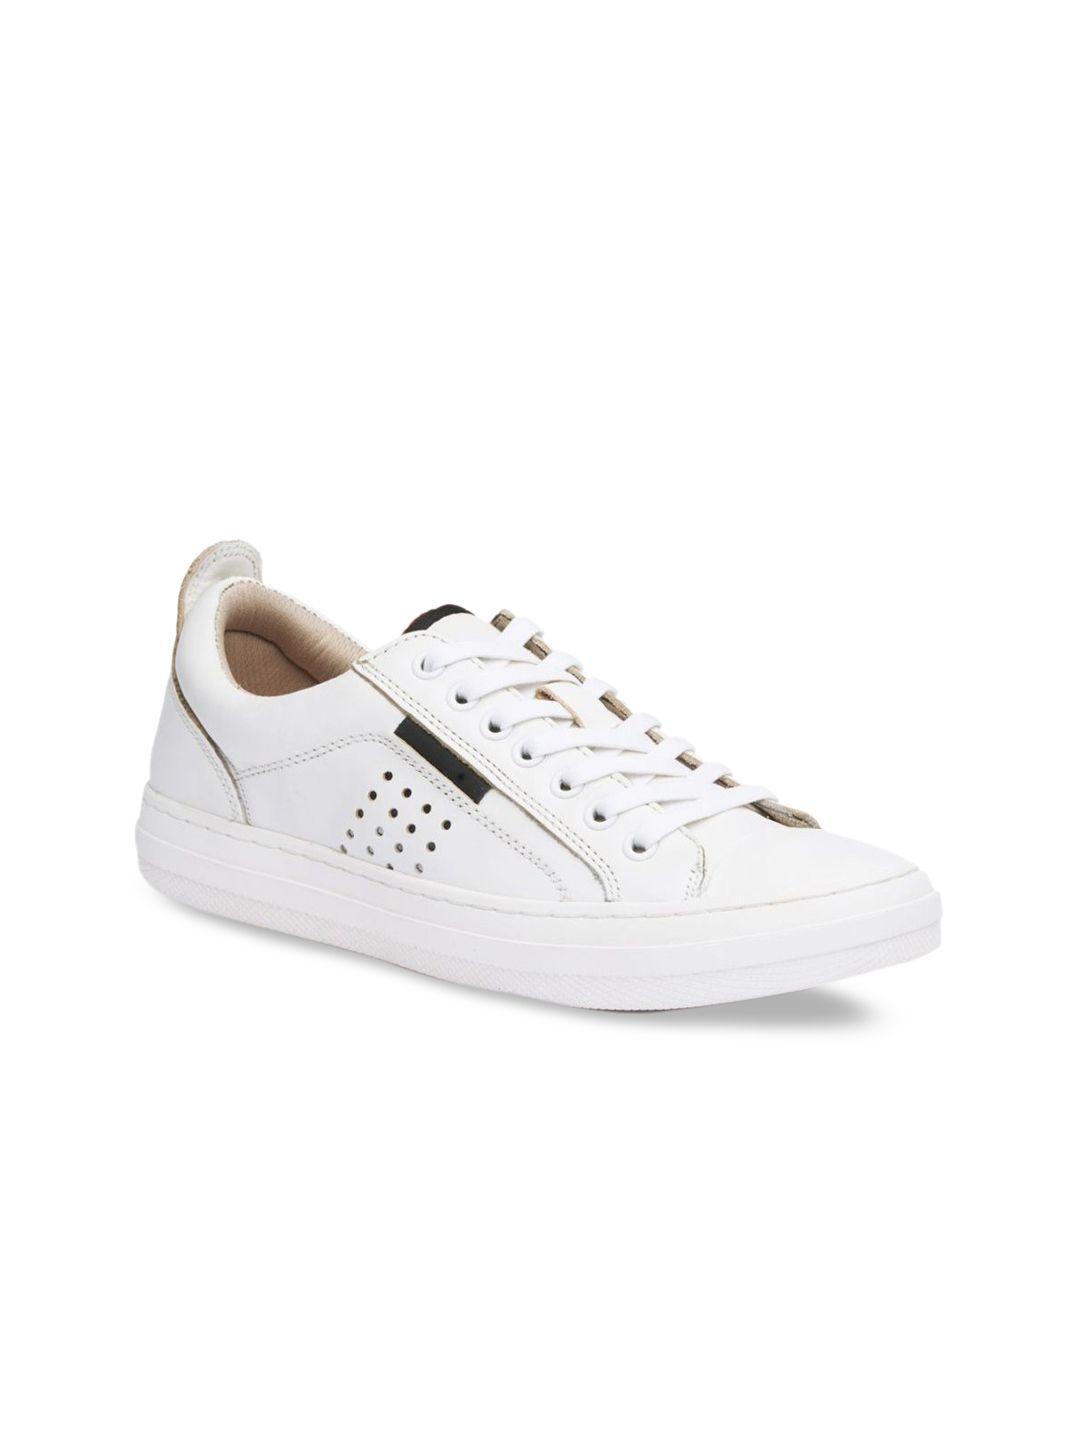 kenneth-cole-men-white-perforations-leather-sneakers